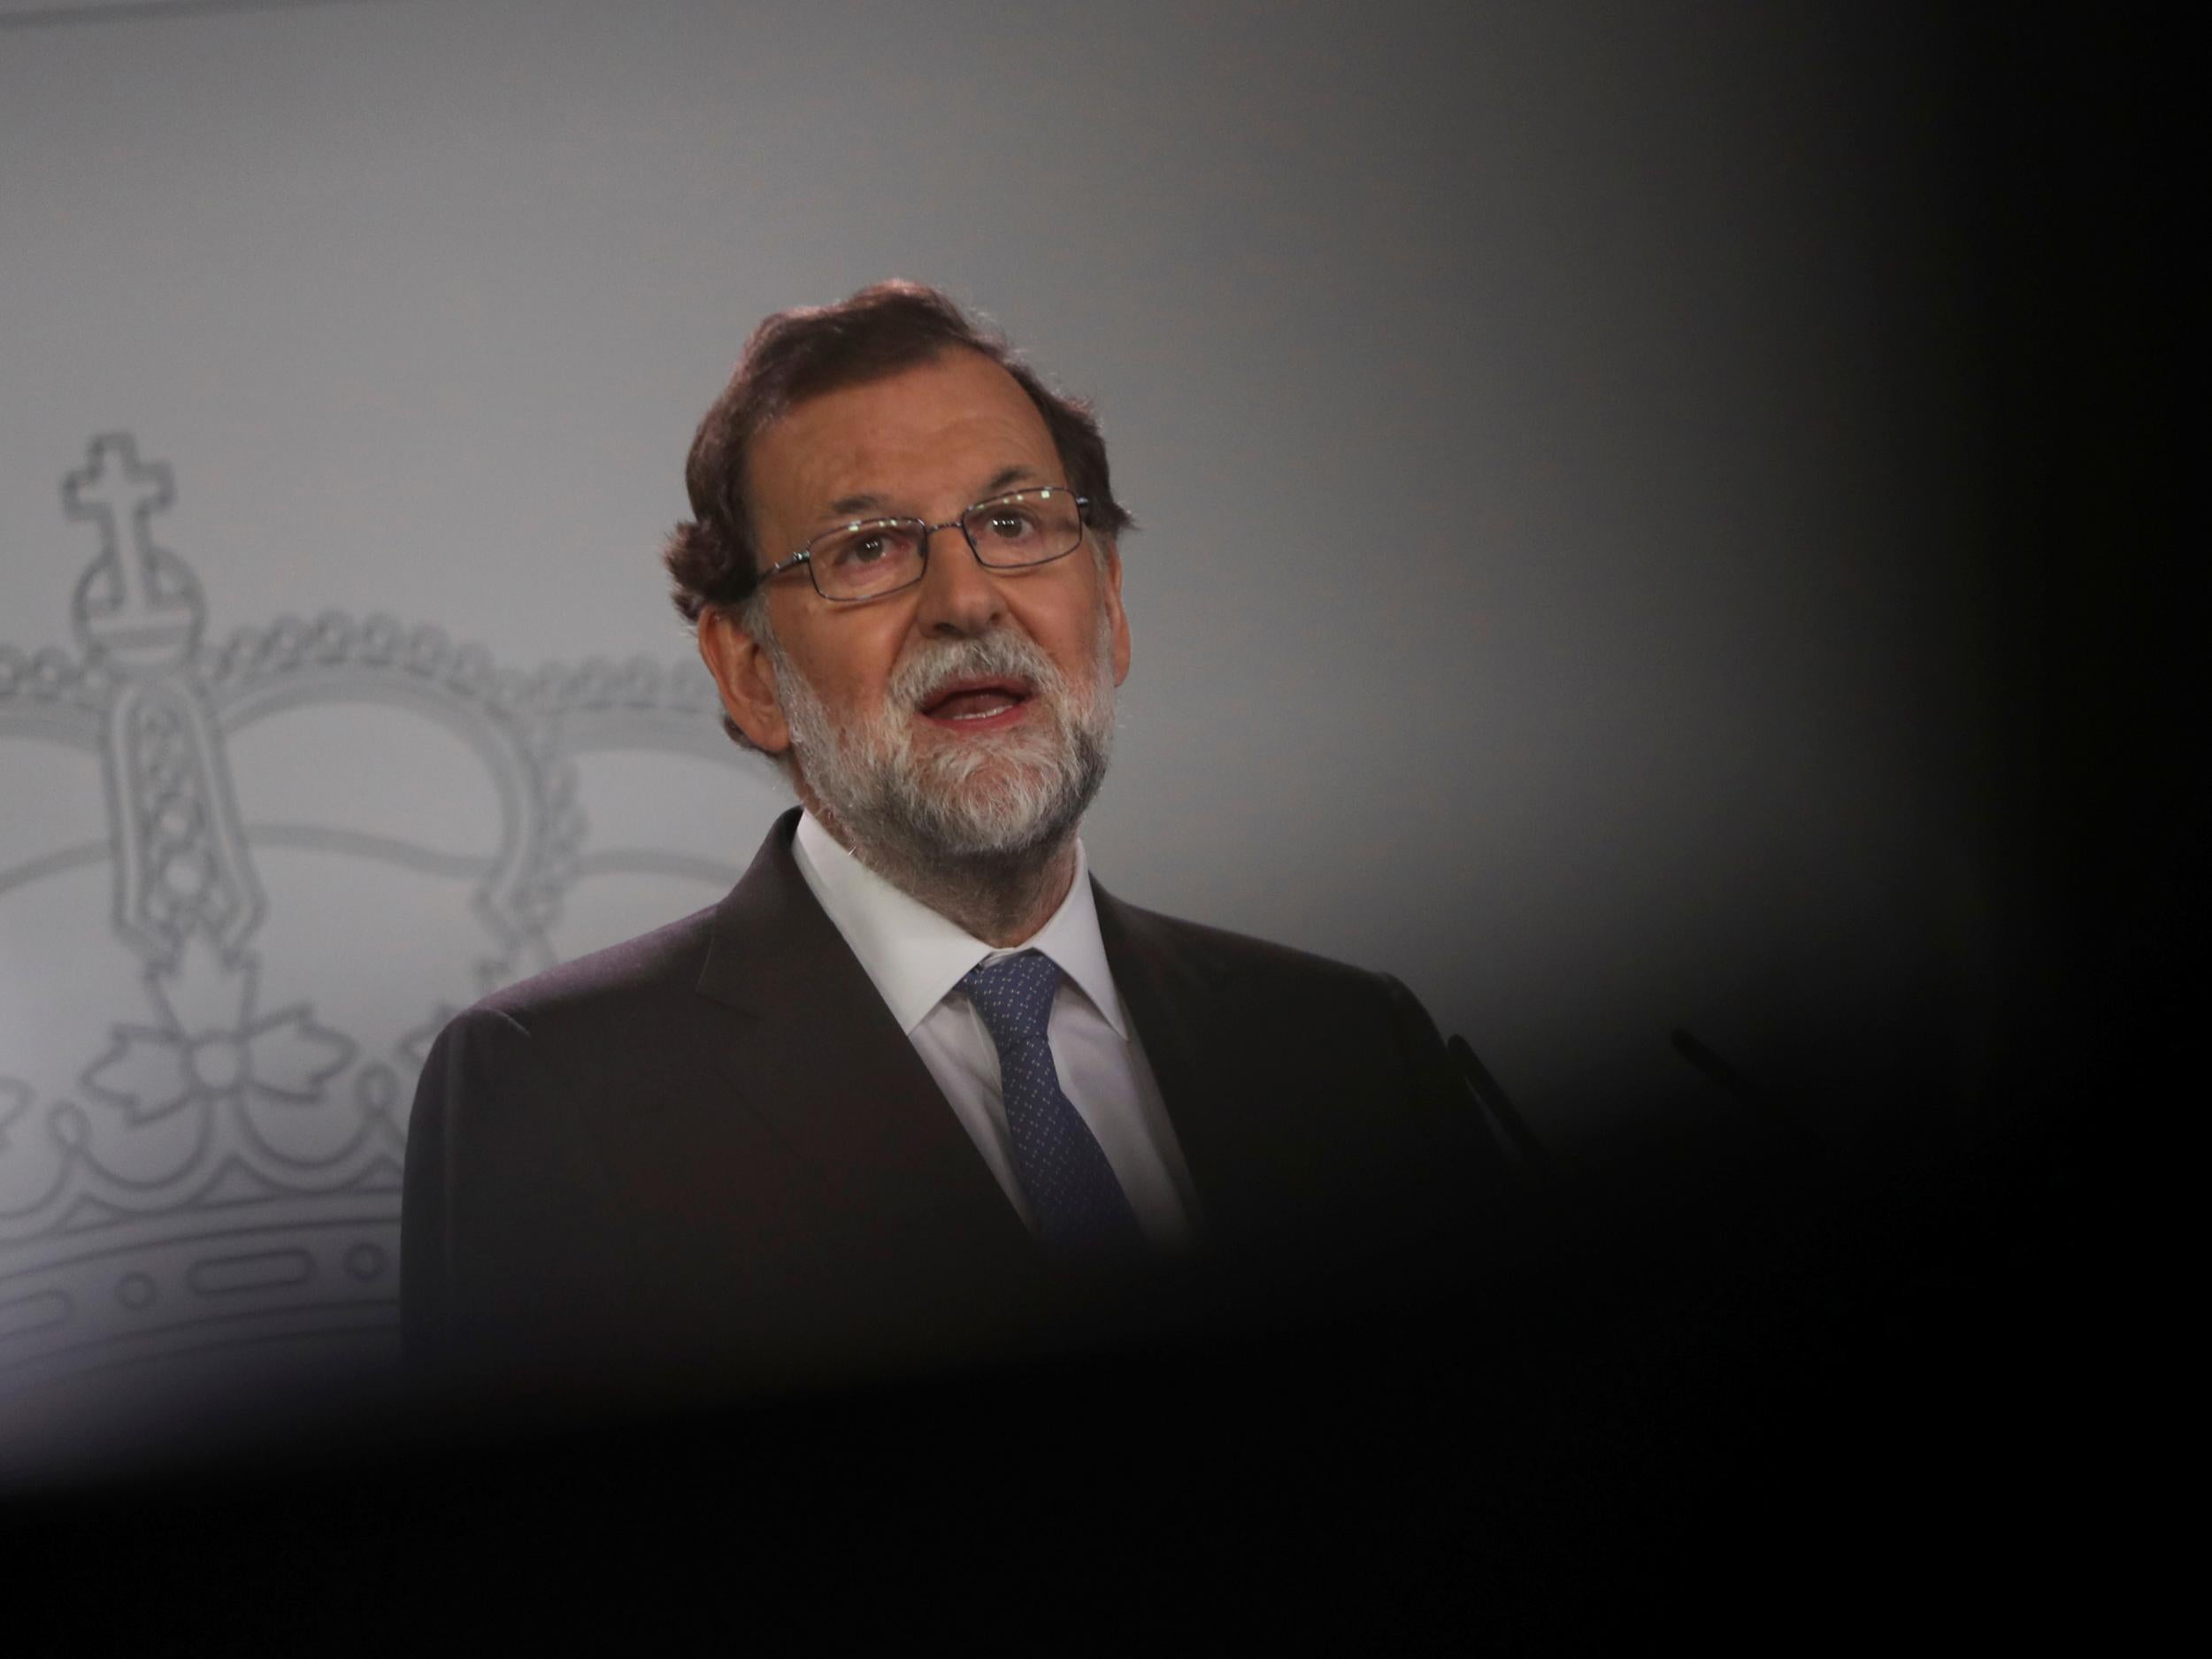 Spain's Prime Minister Mariano Rajoy delivers a statement after an extraordinary cabinet meeting at the Moncloa Palace in Madrid